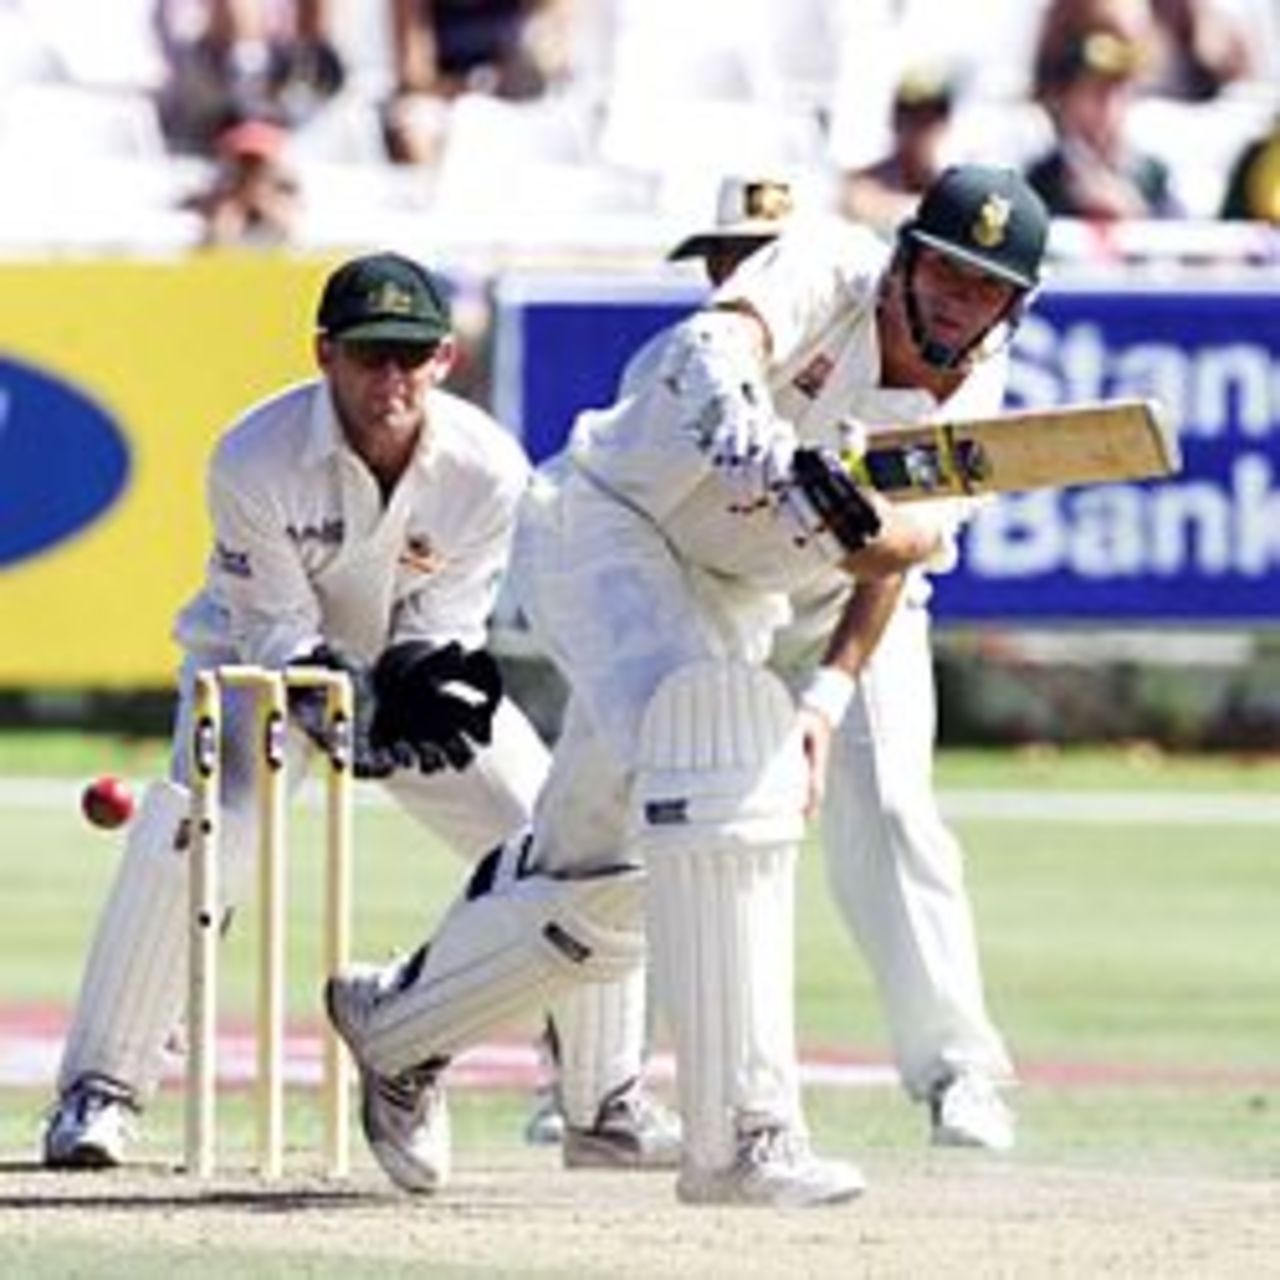 10 Mar 2002: Graeme Smith plays a shot as Adam Gilchrist looks on during the third day of the second test match between South Africa and Australia held at Newlands.